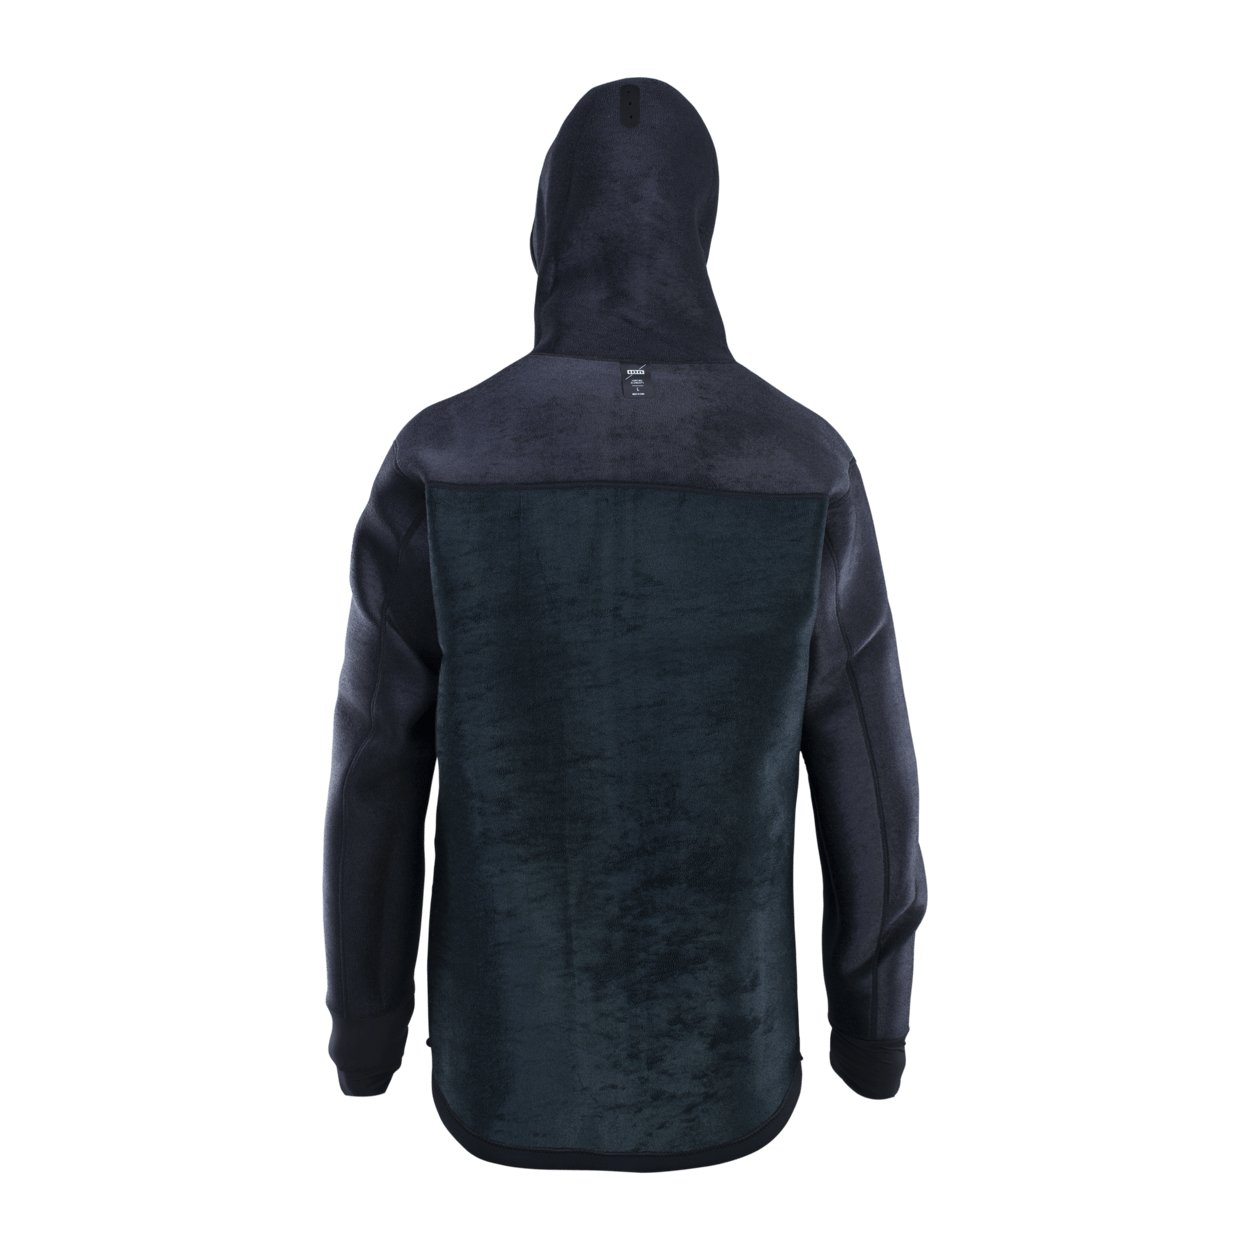 ION Neo Shelter Jacket Amp men 2023 - Worthing Watersports - 9010583118840 - Tops - ION Water